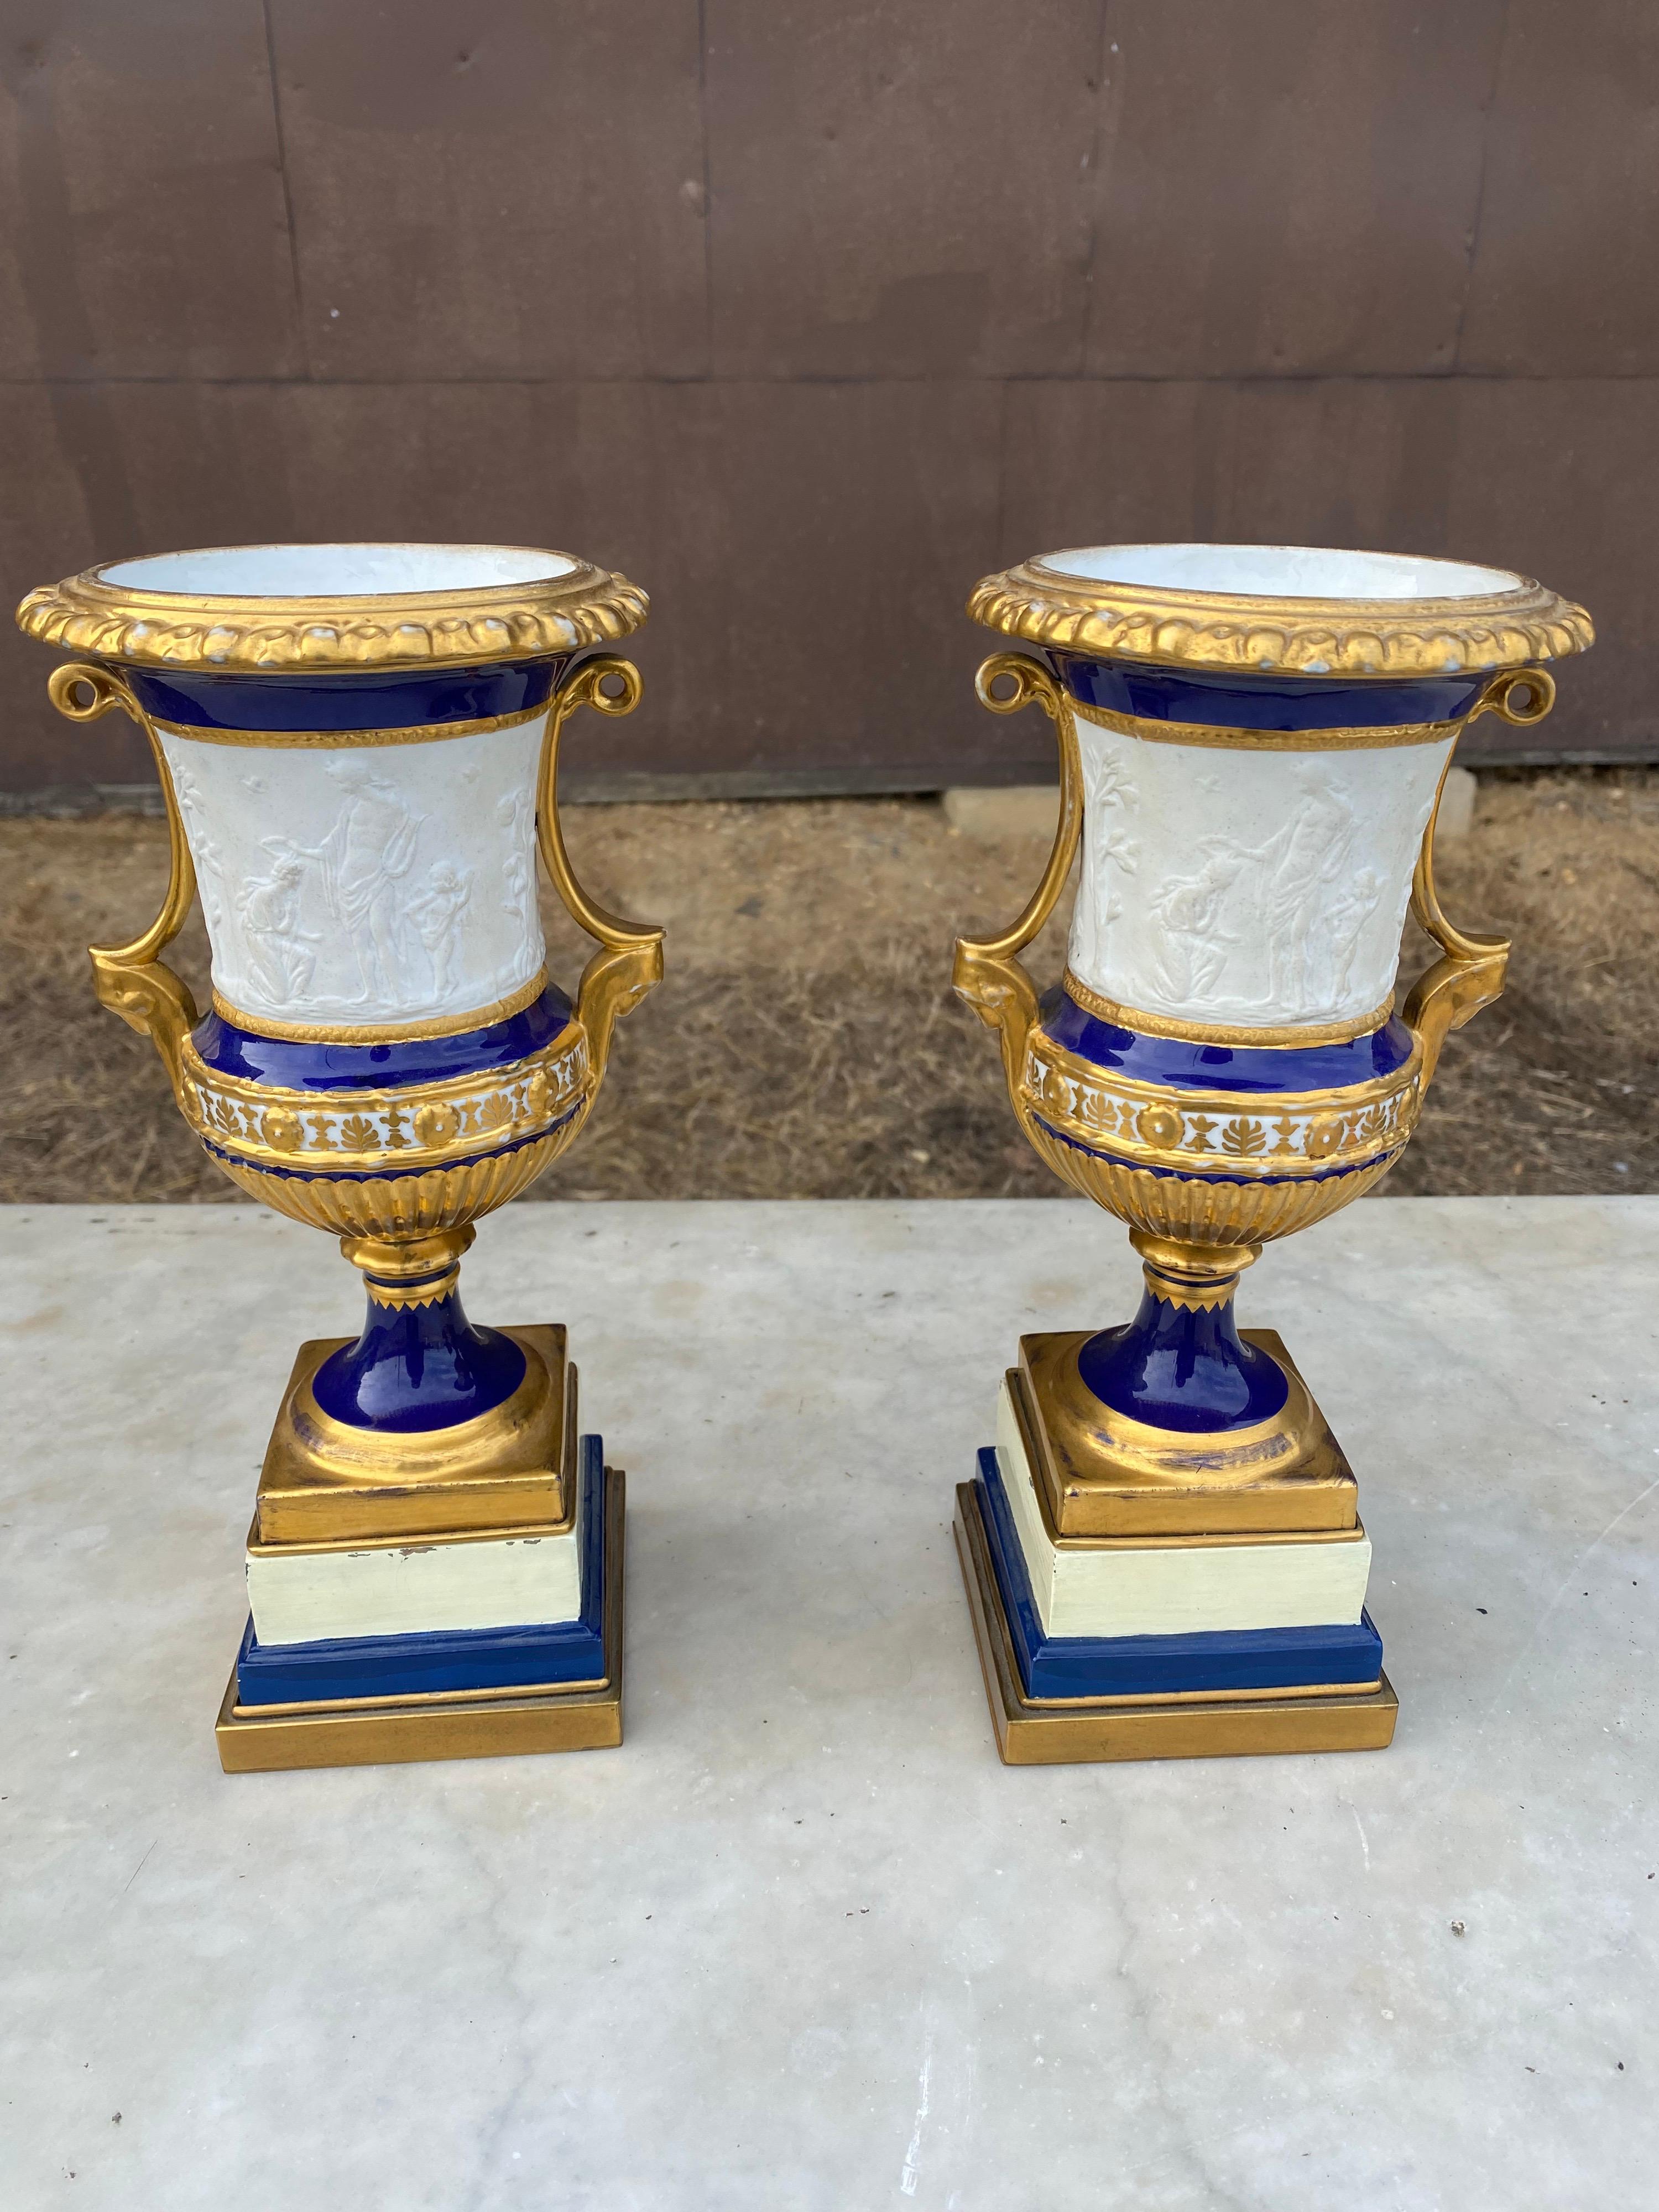 Pair of 19th Century French Porcelain Urns with Neoclassical Scenes For Sale 4